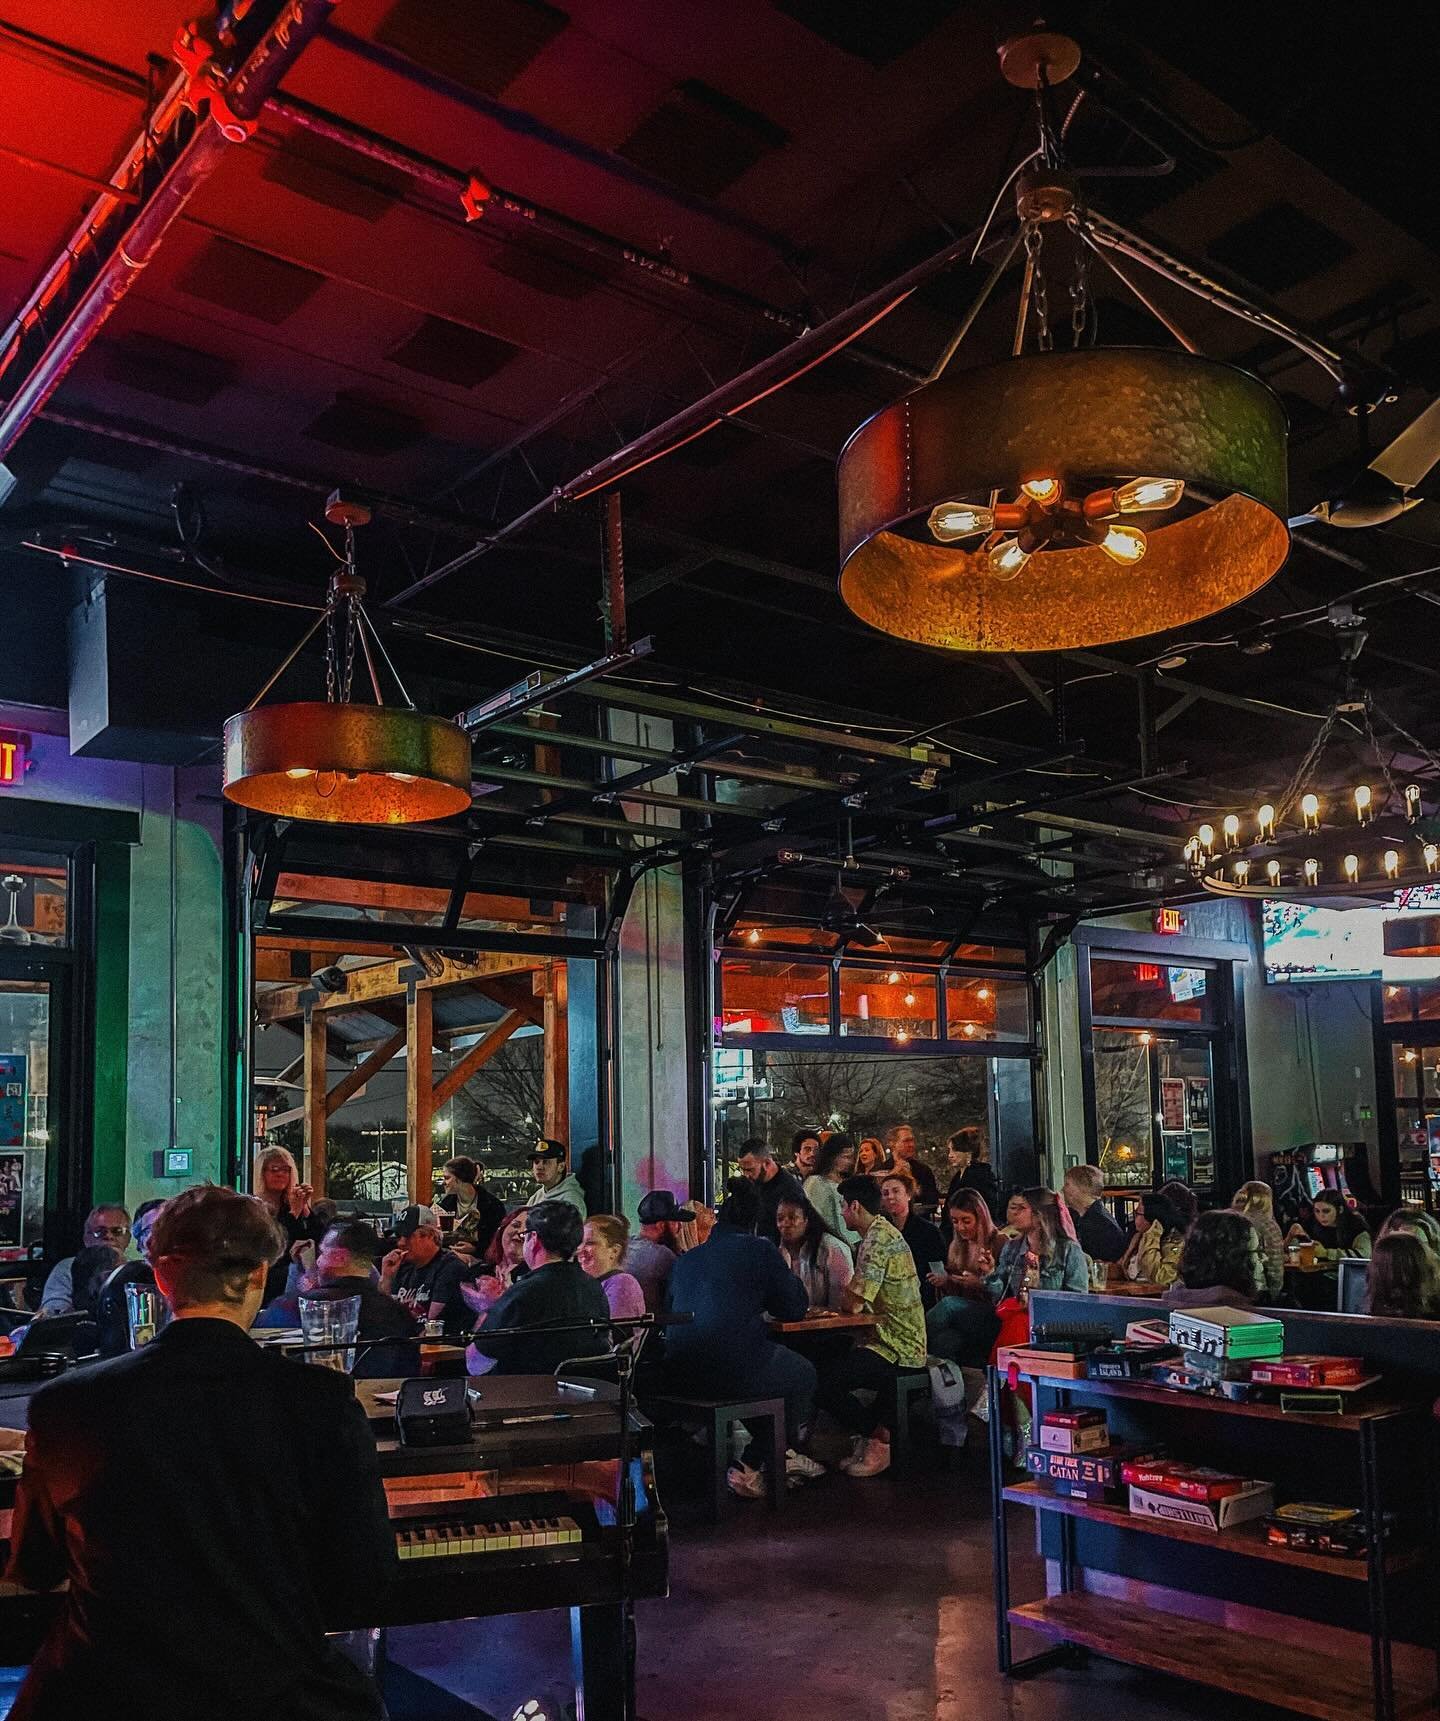 Dueling Pianos are back THIS SATURDAY! 🔥 7:30PM-10:30PM‼️

We love having a good time with y&rsquo;all for Dueling Pianos with @atlduelingpianos 🙌 so bring your crew and let&rsquo;s make some memories 😉

#duelingpianos #atlanta #pianobar #brewery 